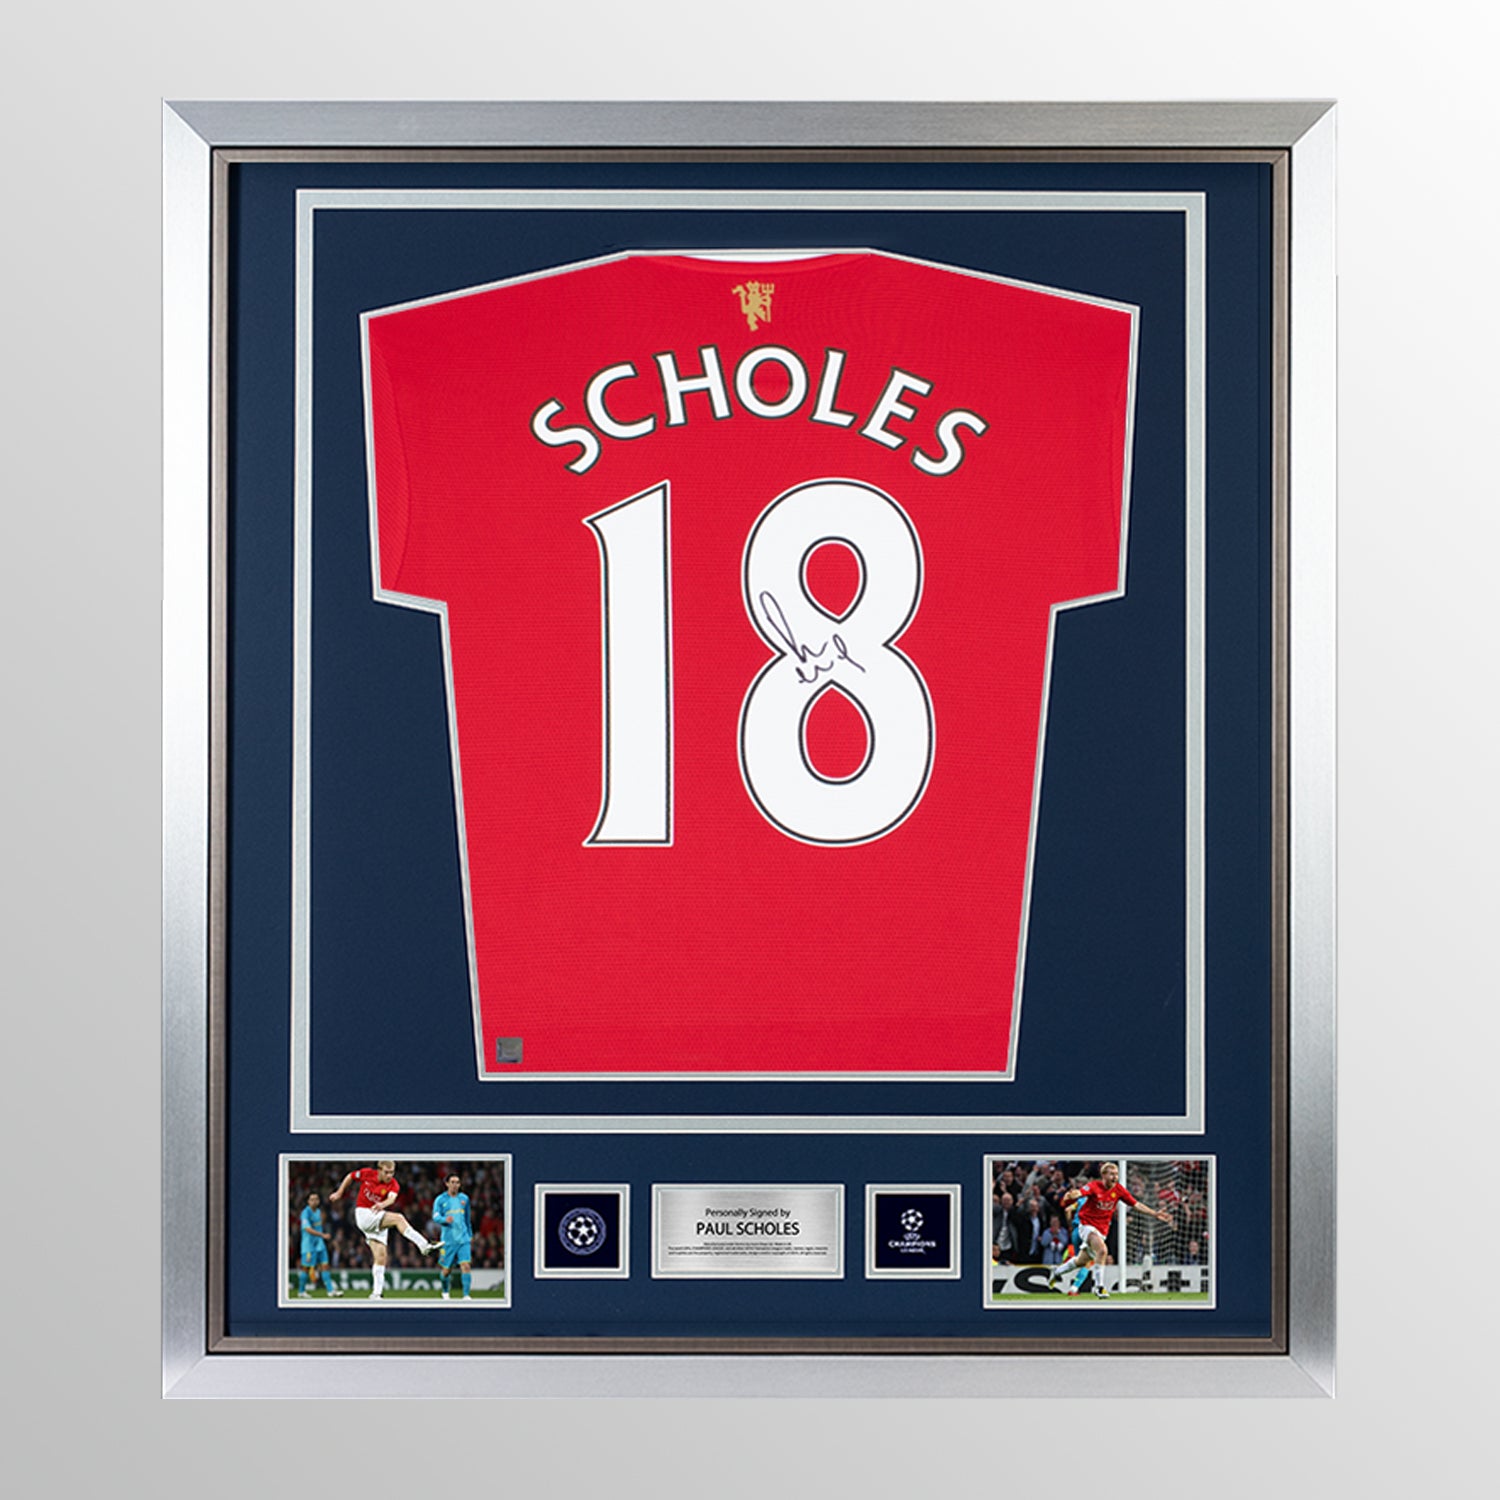 Paul Scholes Official UEFA Champions League Back Signed and Framed Manchester United 2021-22 Home Shirt UEFA Club Competitions Online Store